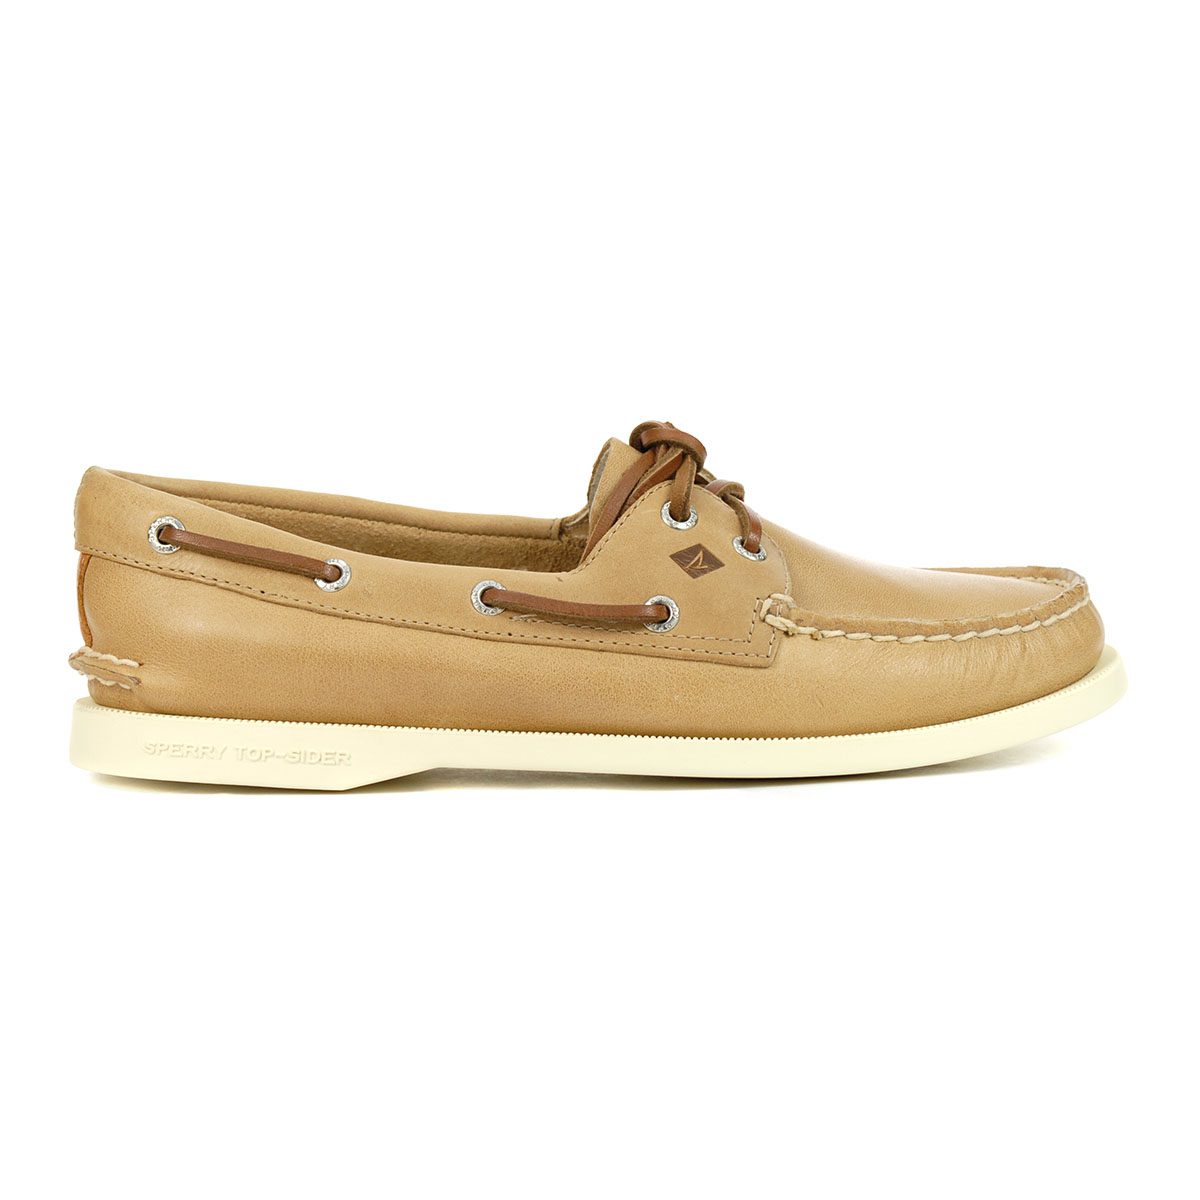 Sperry Women's Authentic Original 2-Eye Splash Natural Boat Shoes STS86458